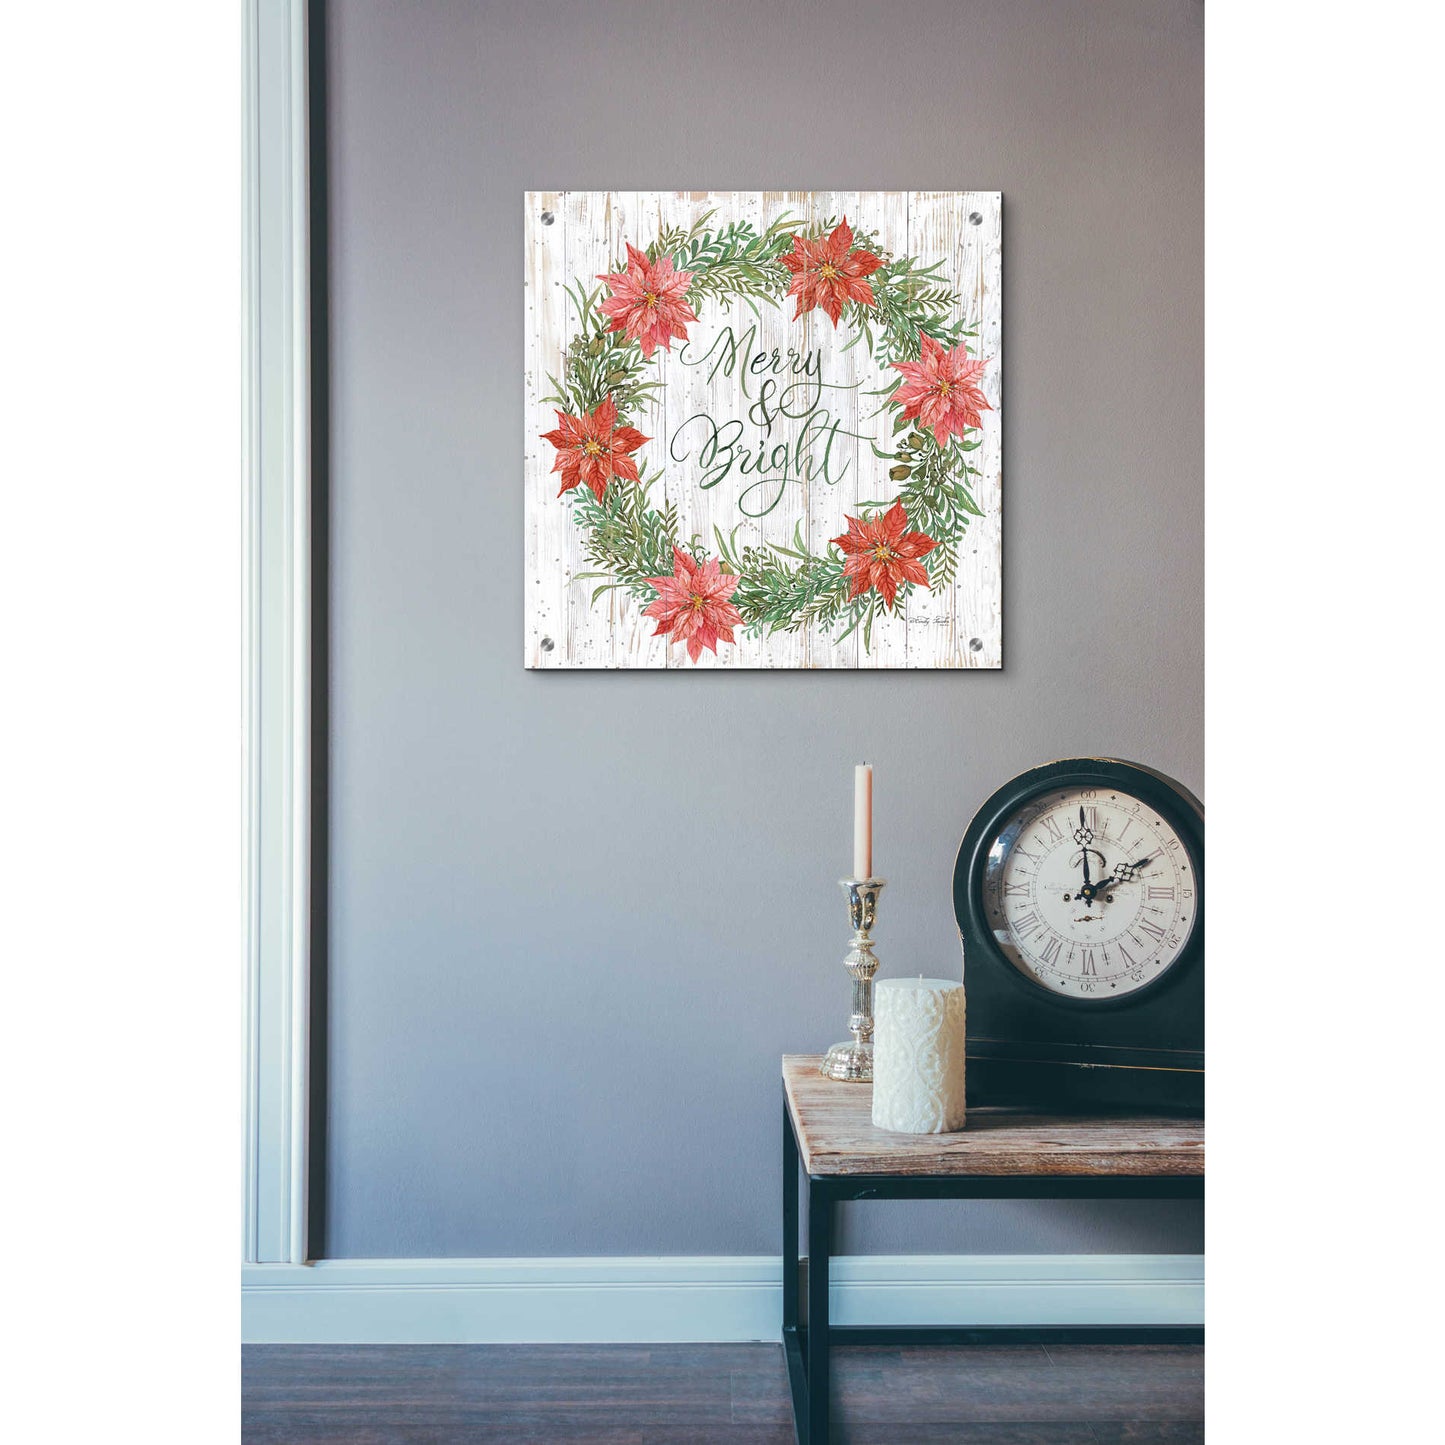 Epic Art 'Merry & Bright Wreath' by Cindy Jacobs, Acrylic Glass Wall Art,24x24